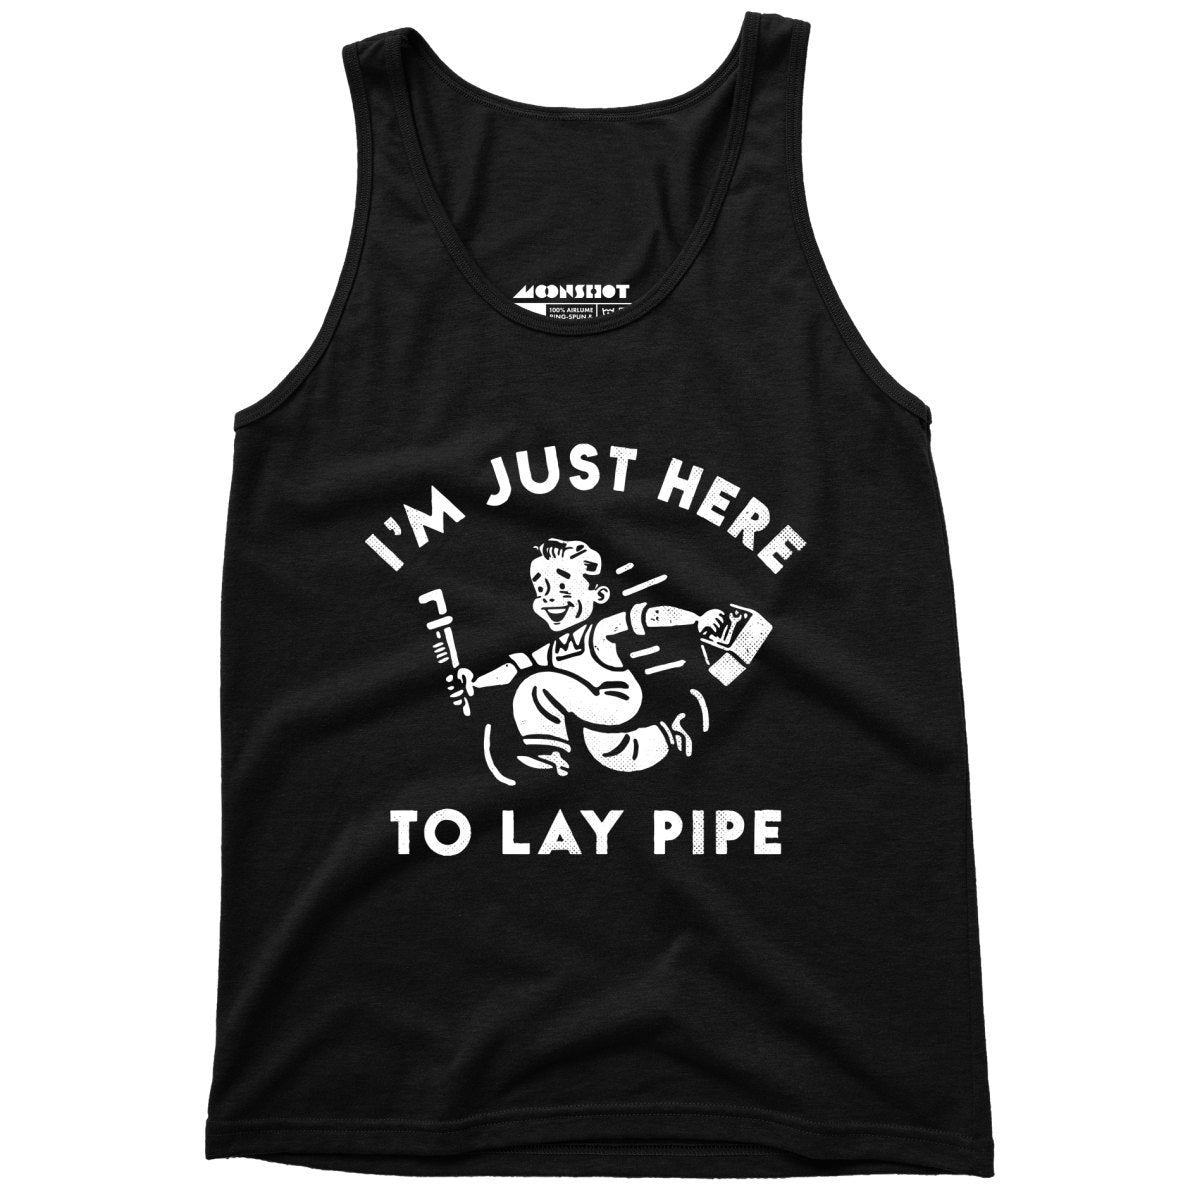 I'm Just Here to Lay Pipe - Unisex Tank Top